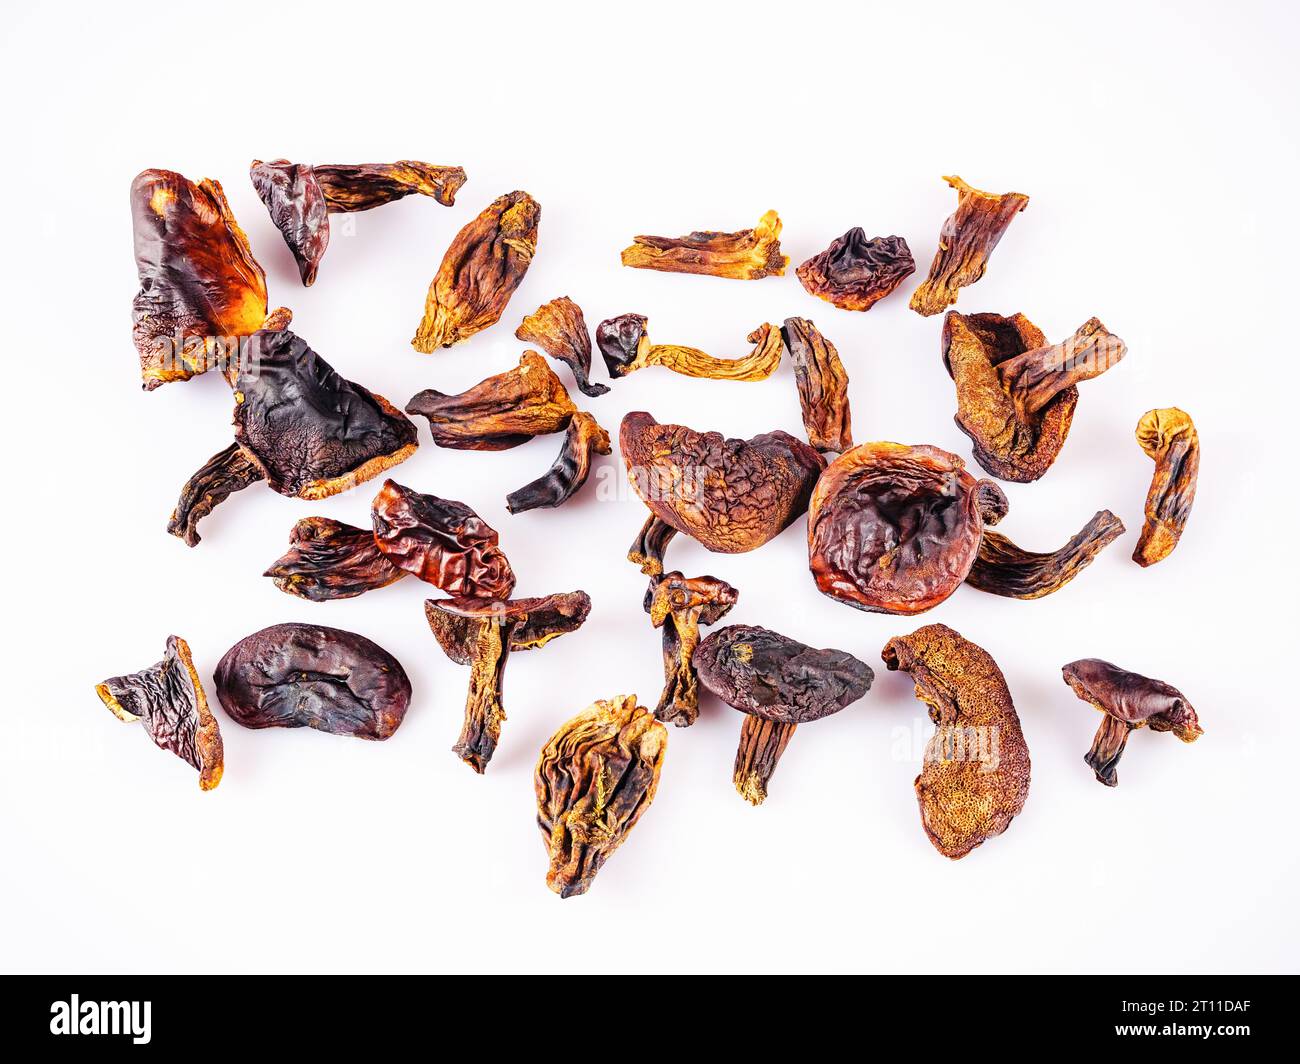 Dried wild mushrooms on a white surface Stock Photo